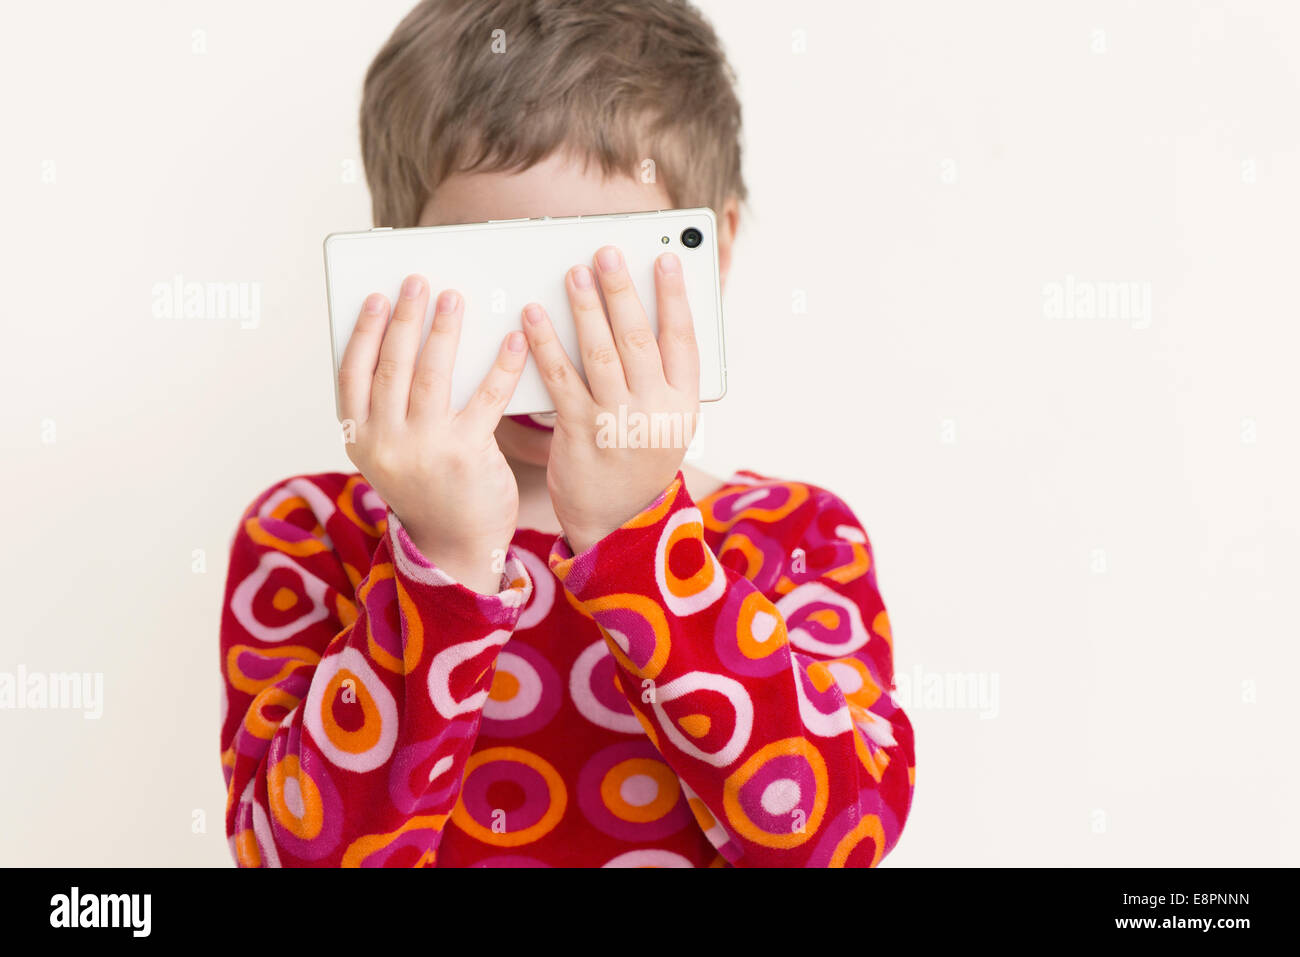 Little girl with red dress looking at smart phone. Stock Photo